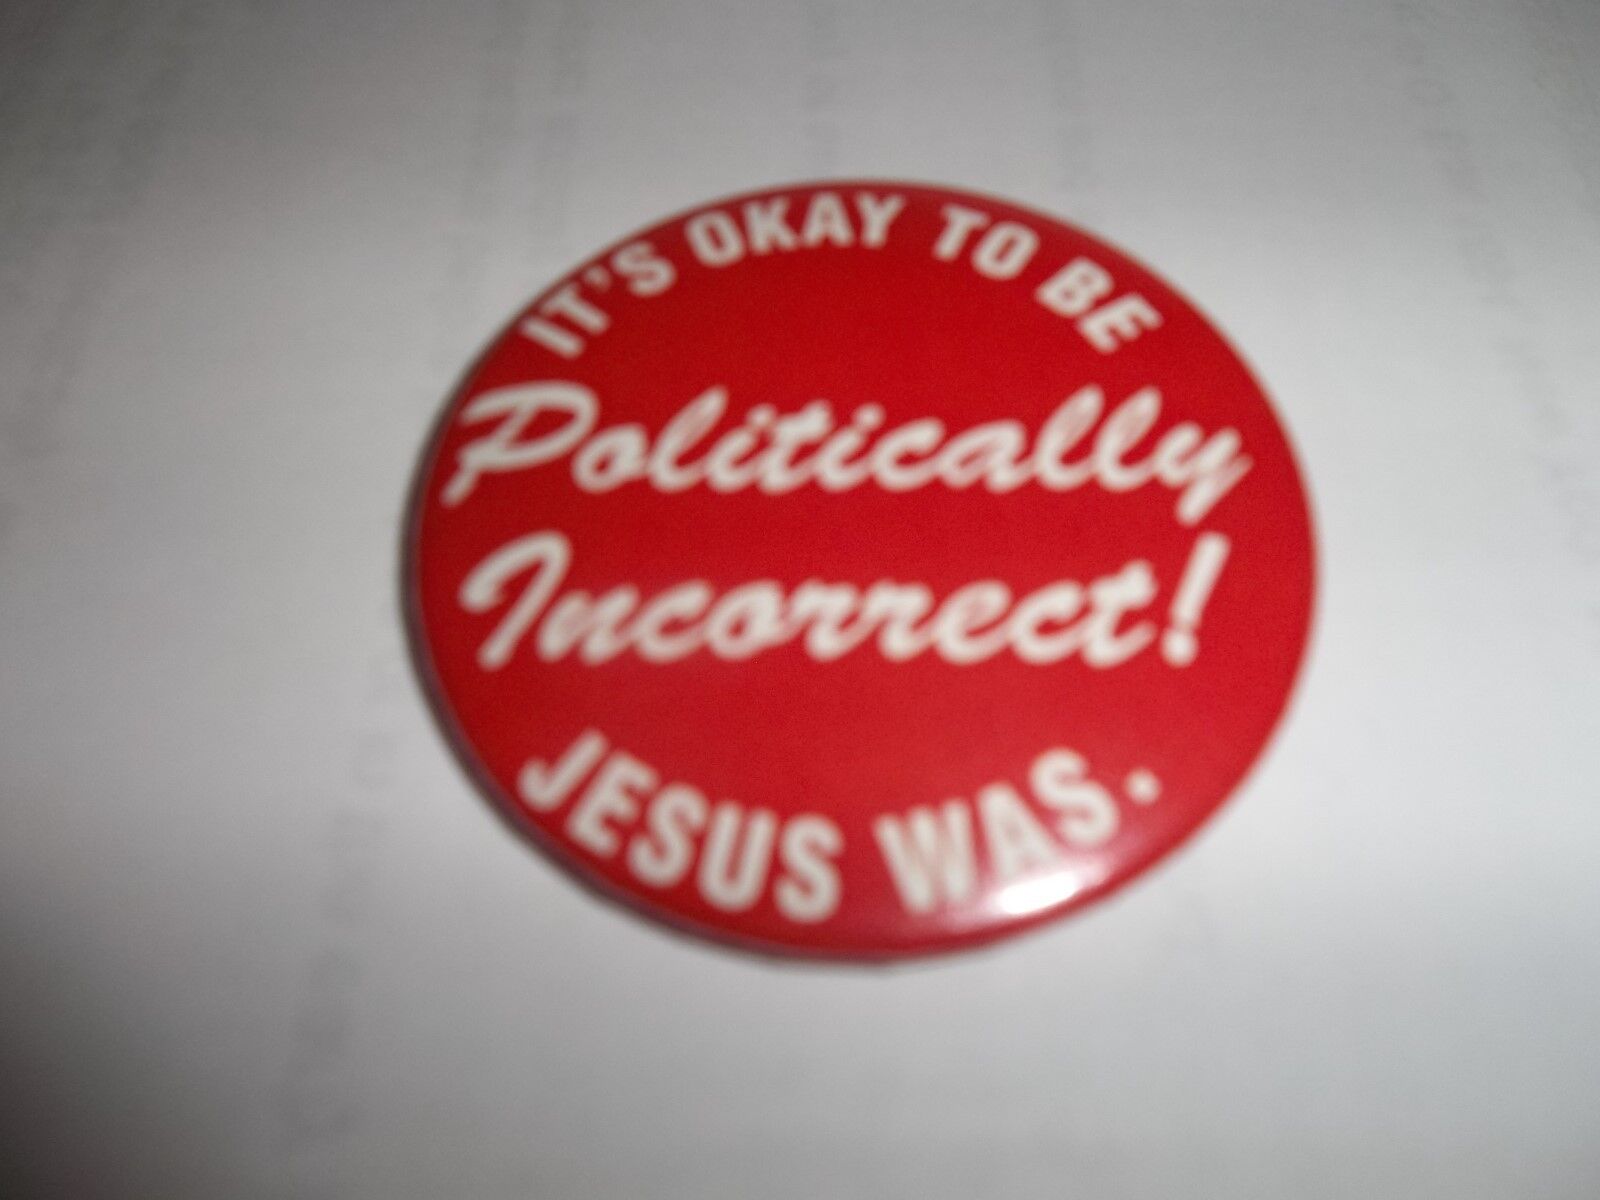 IT\'S OKAY TO BE POLITICALLY INCORRECT - JESUS WAS CAMPAIGN BUTTON 